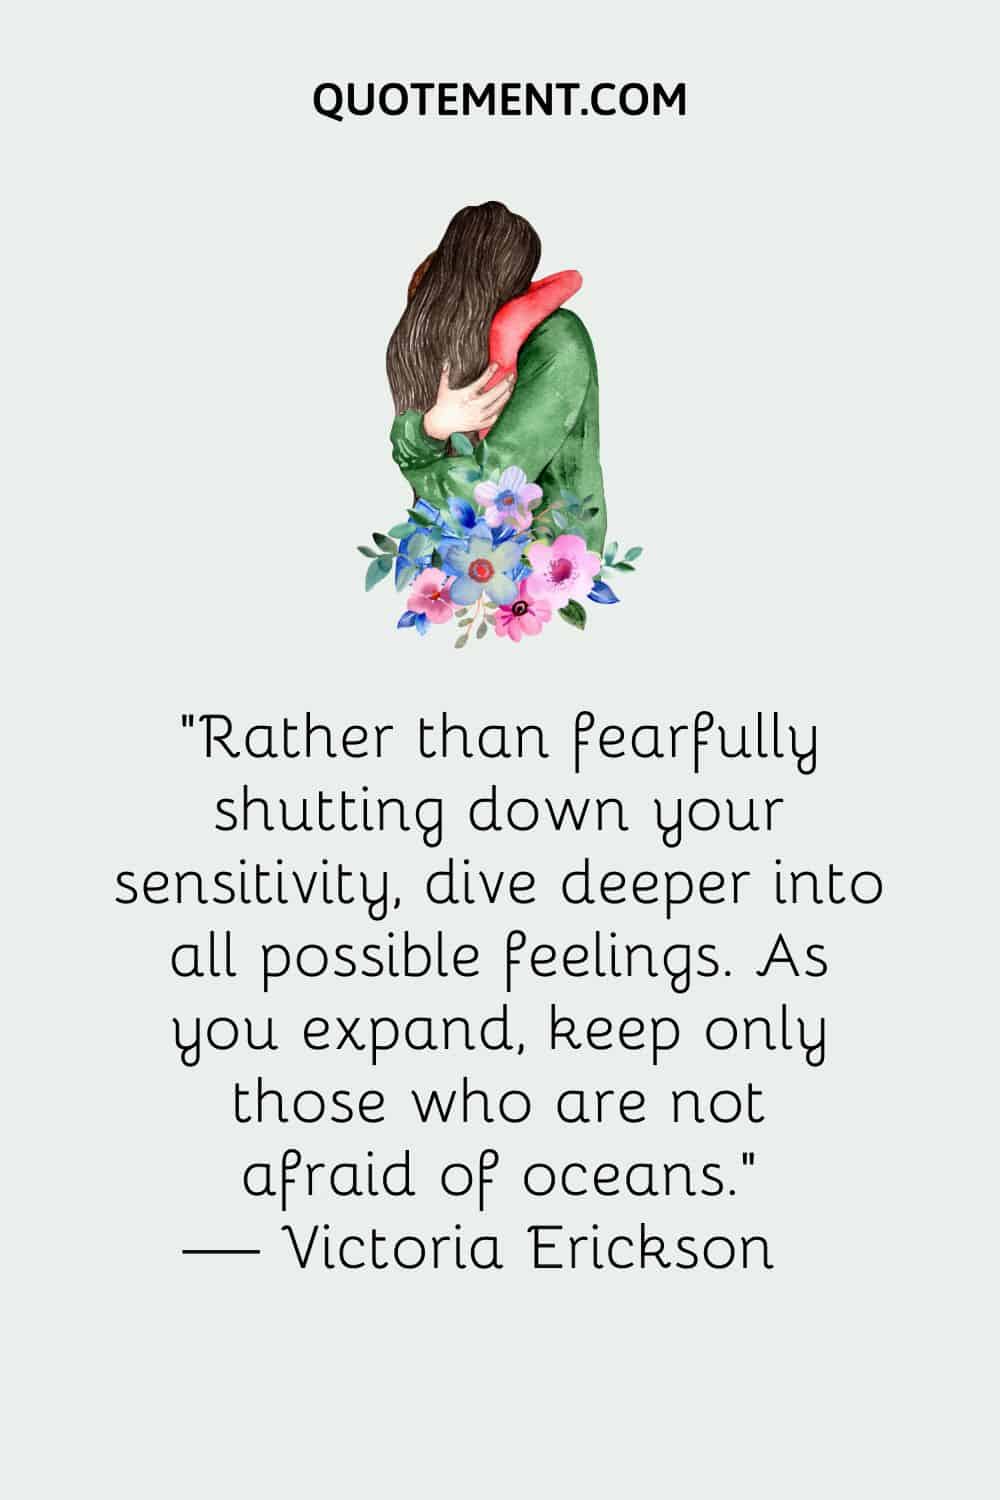 Rather than fearfully shutting down your sensitivity, dive deeper into all possible feelings. As you expand, keep only those who are not afraid of oceans